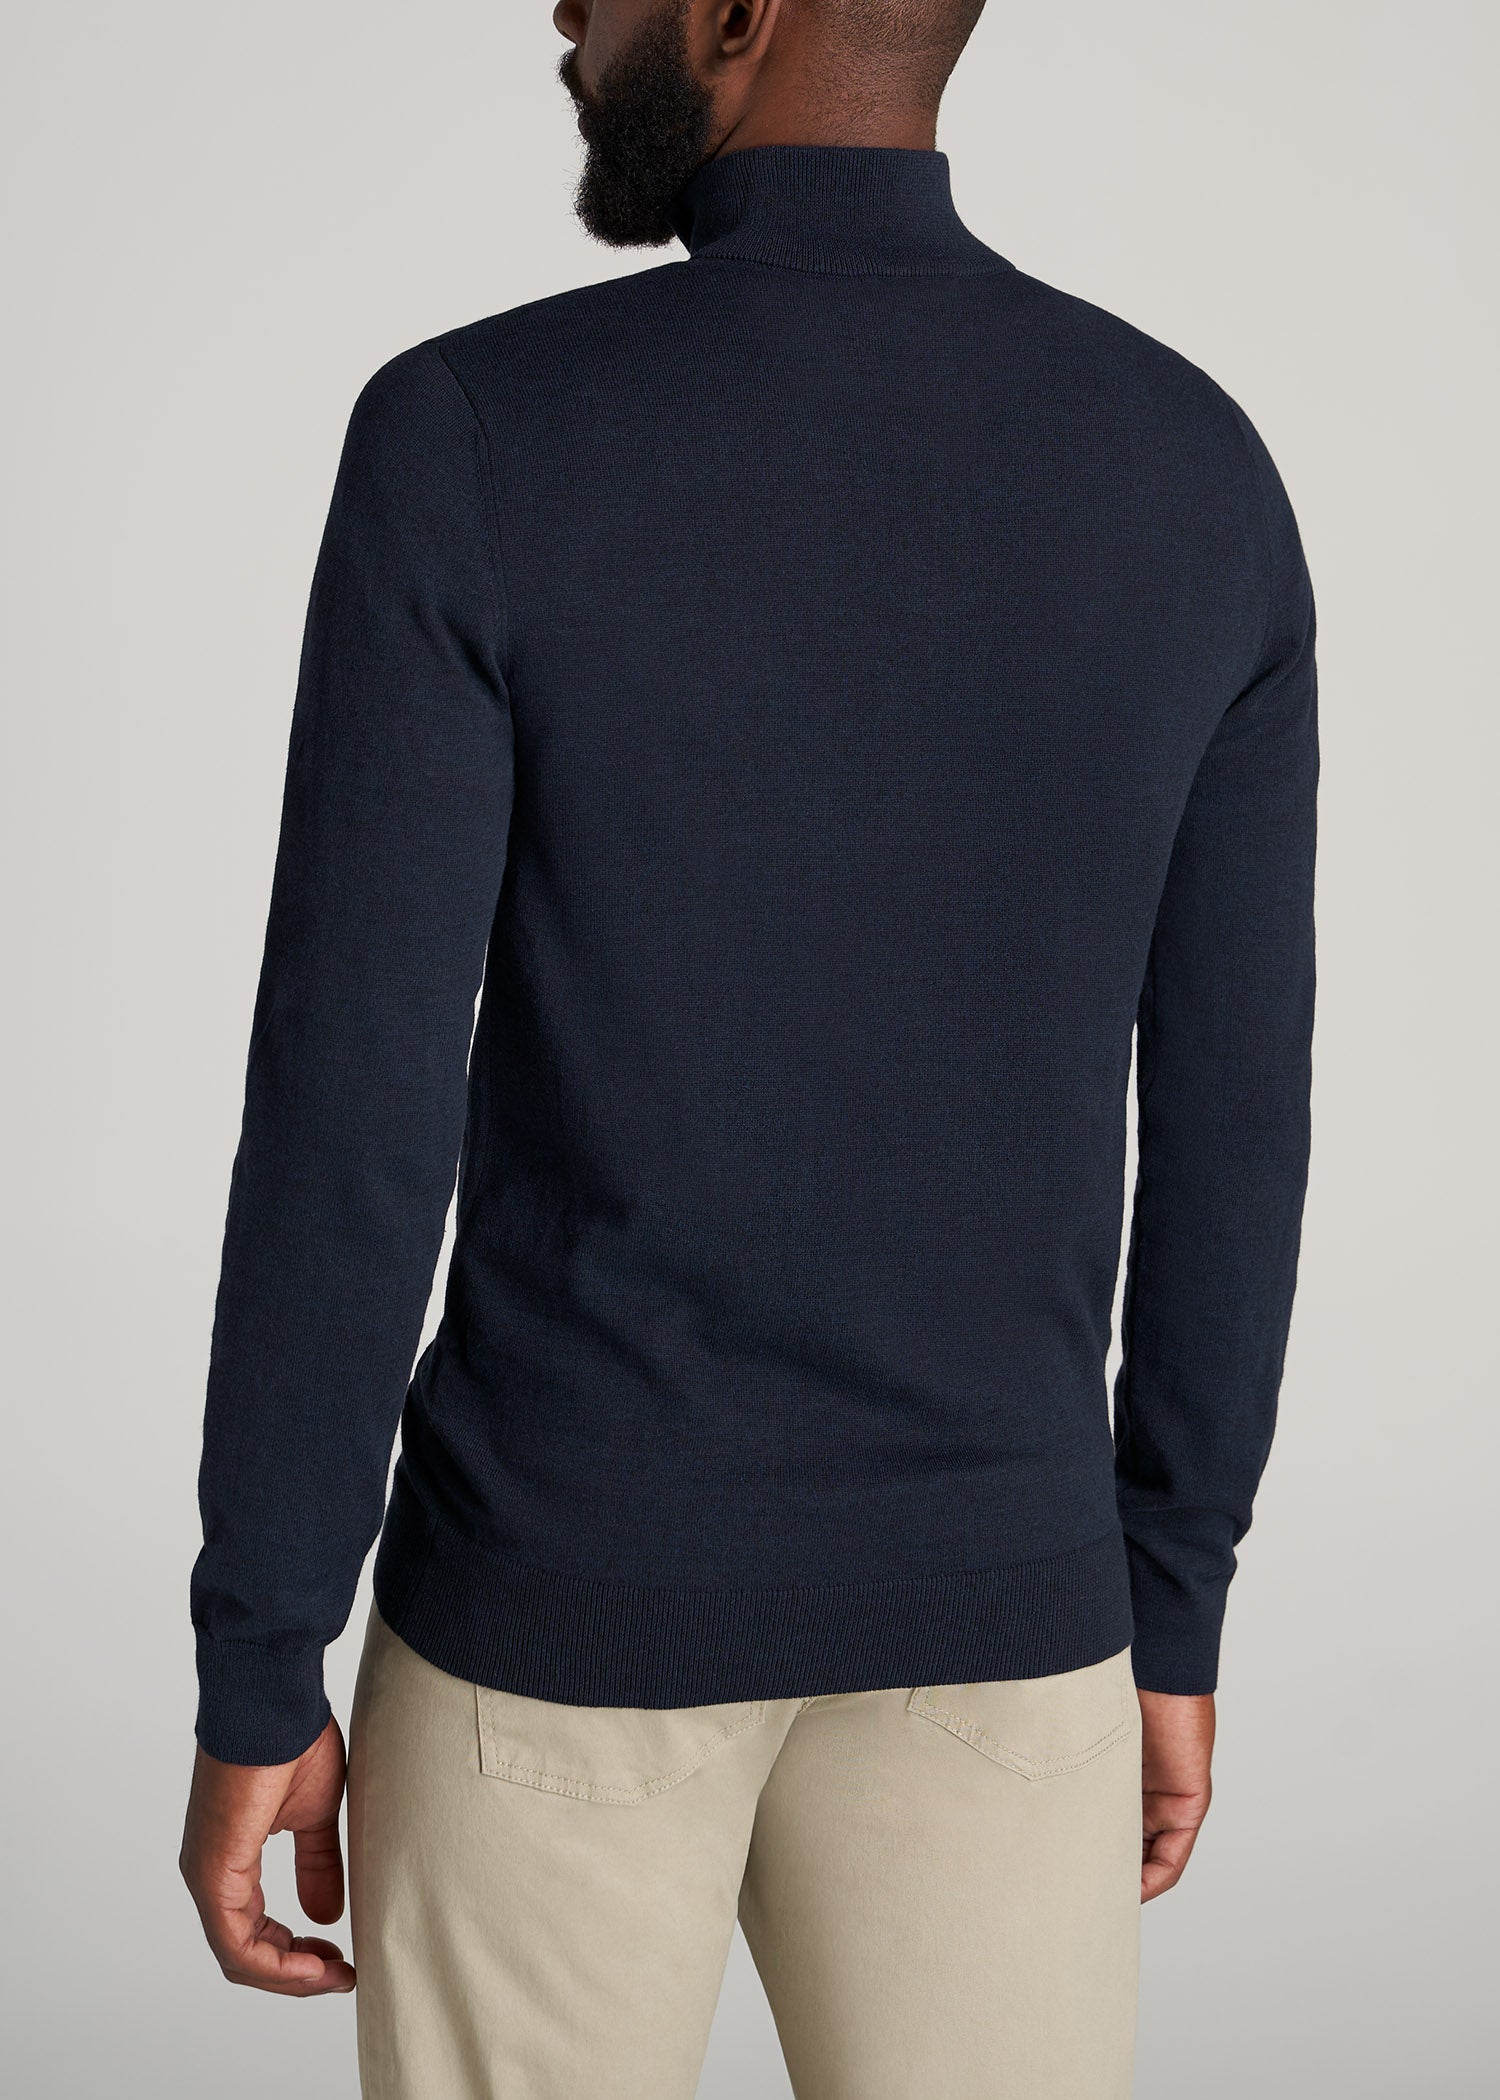 Everyday Crewneck Tall Men's Sweater in Patriot Blue